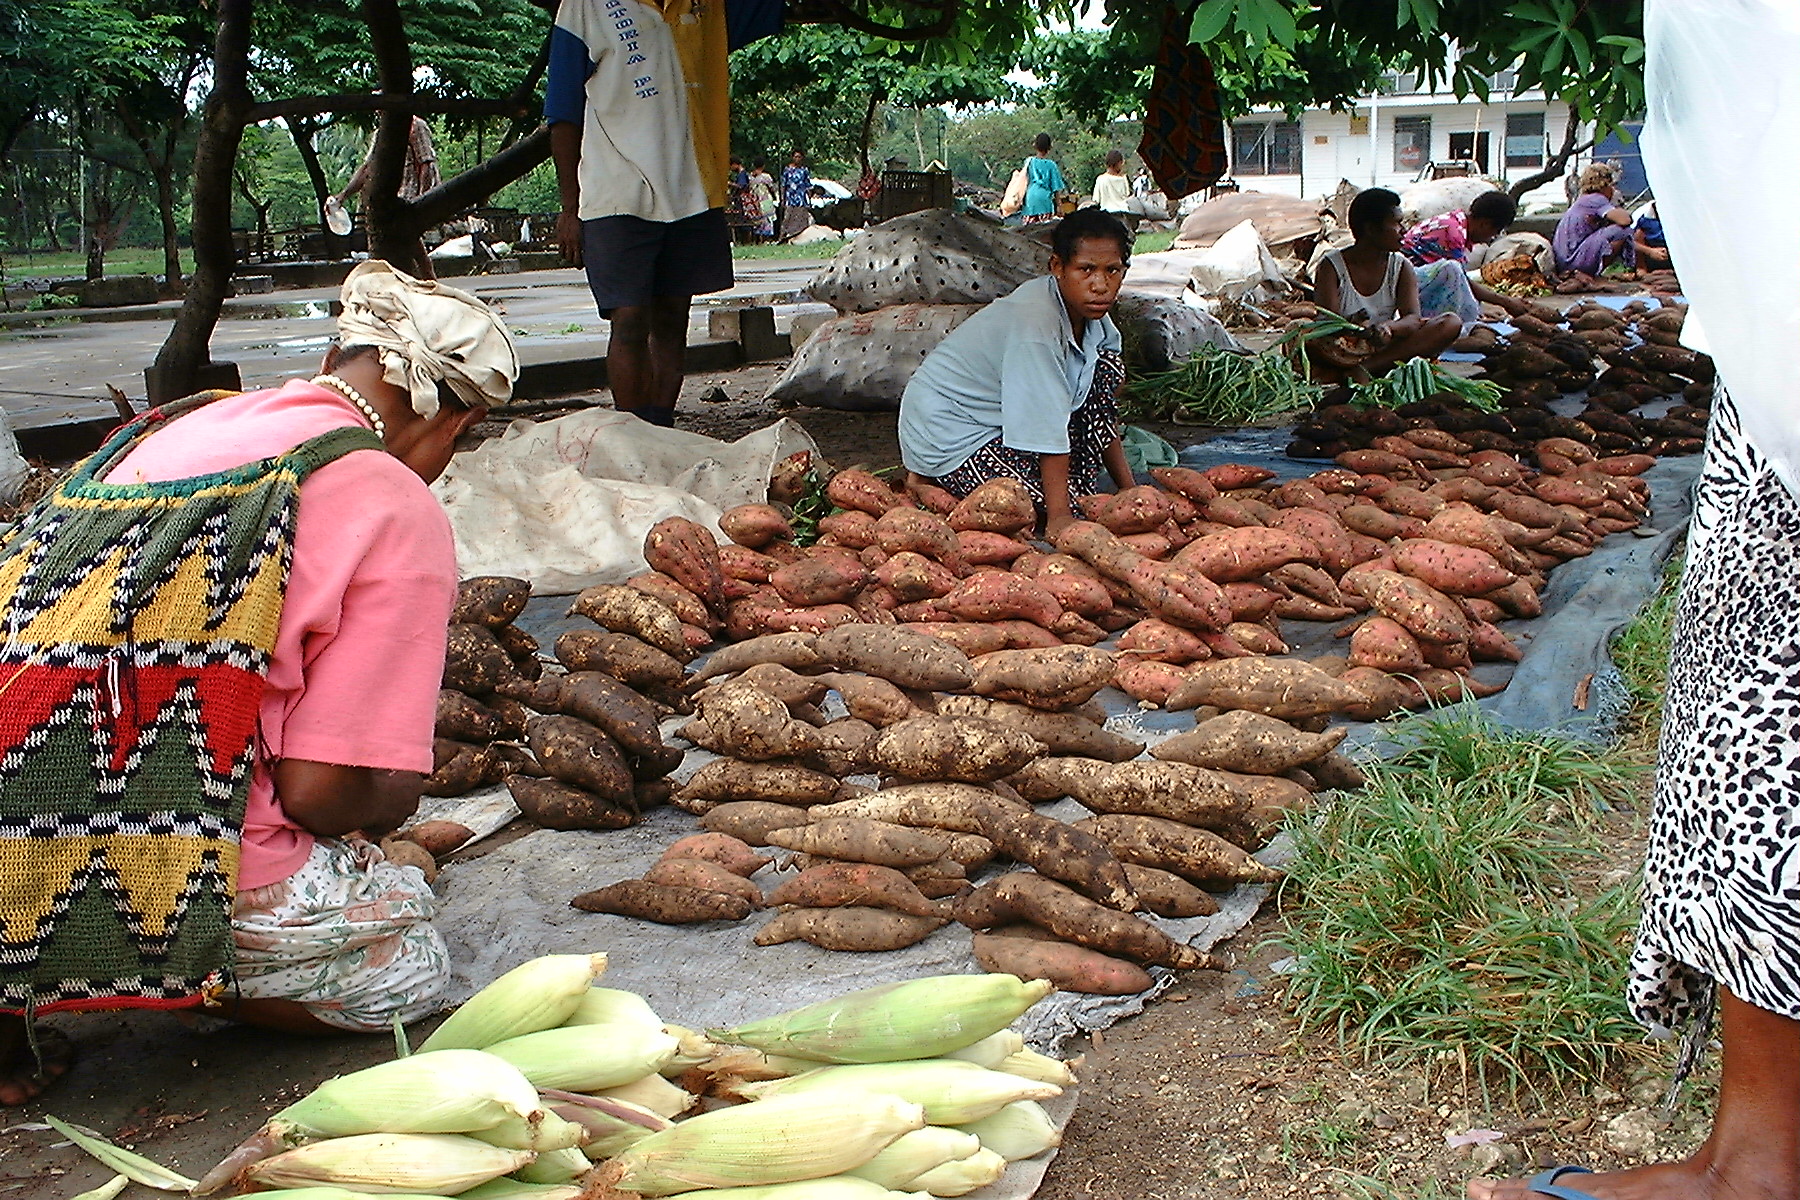 Market in Madang, PNG (Tanaka Juuyoh/Flickr/CC BY 2.0)